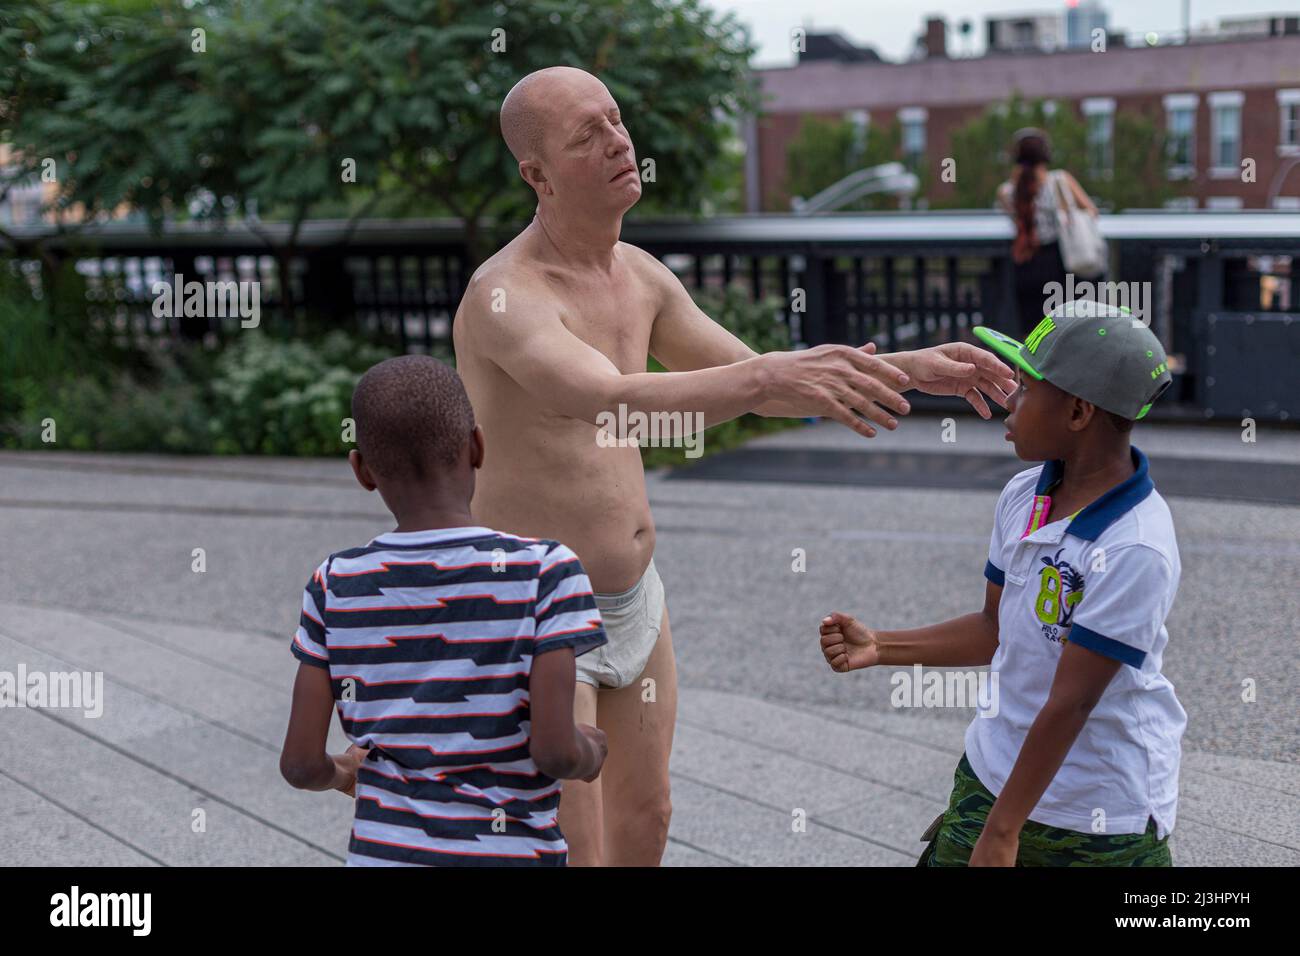 Chelsea, New York City, NY, USA, Exhibition 'Wanderlust' at the High Line (a popular linear park built on the elevated train tracks above Tenth Ave). In Focus, Tony Matelli's 'Sleepwalker', a hyperreal sculpture of an old man staggering about in his saggy white briefs. Stock Photo